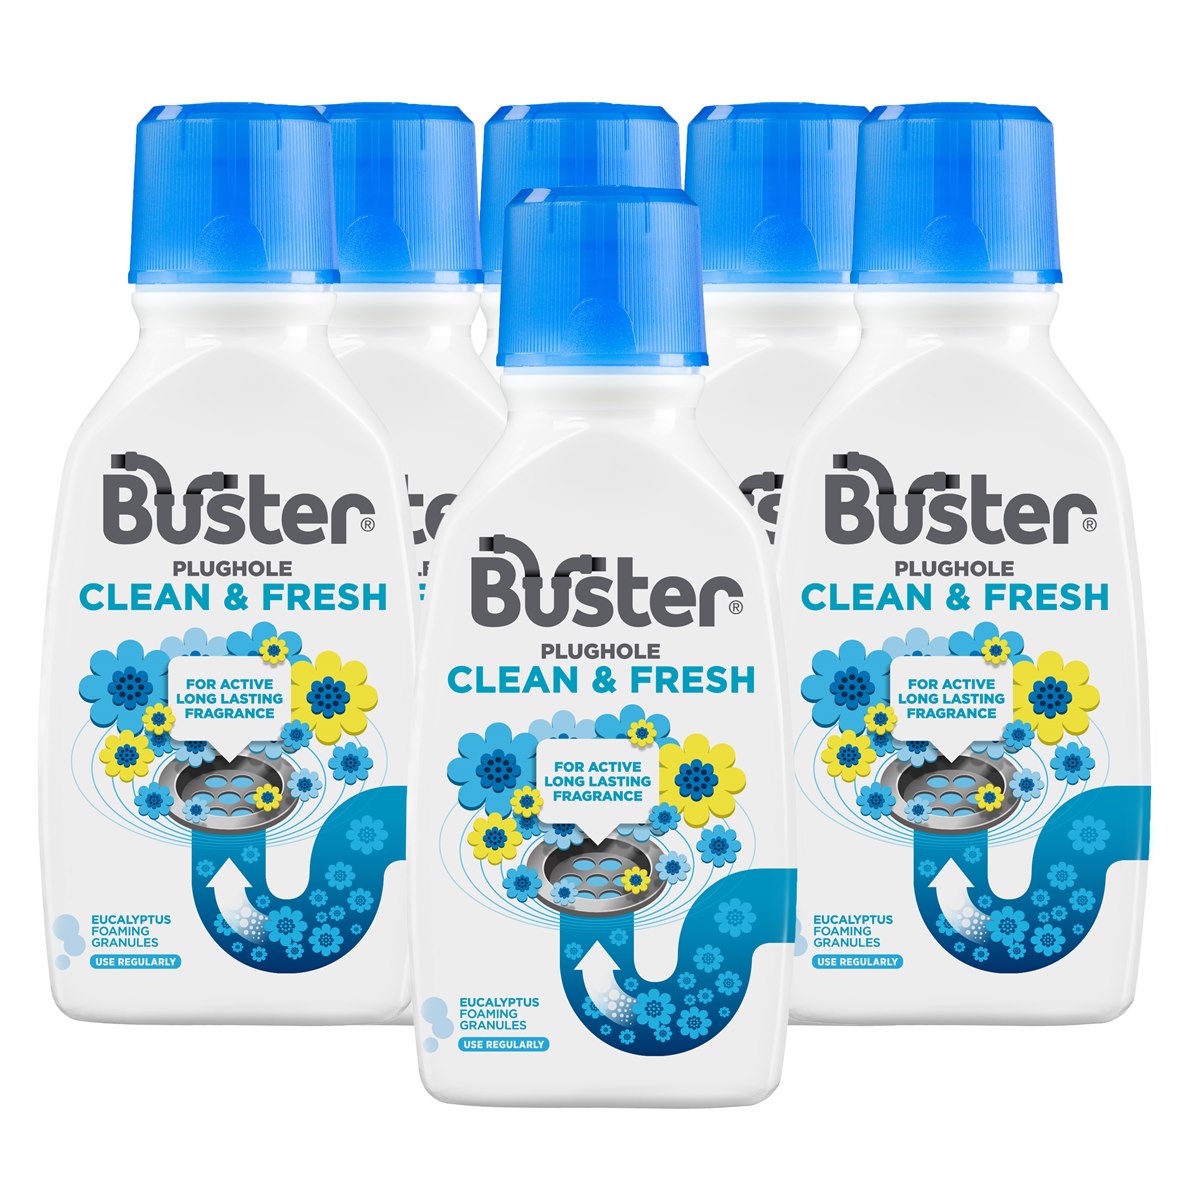 Case of 6 x Buster Plughole Clean and Fresh Eucalyptus Foaming Granules 300ml